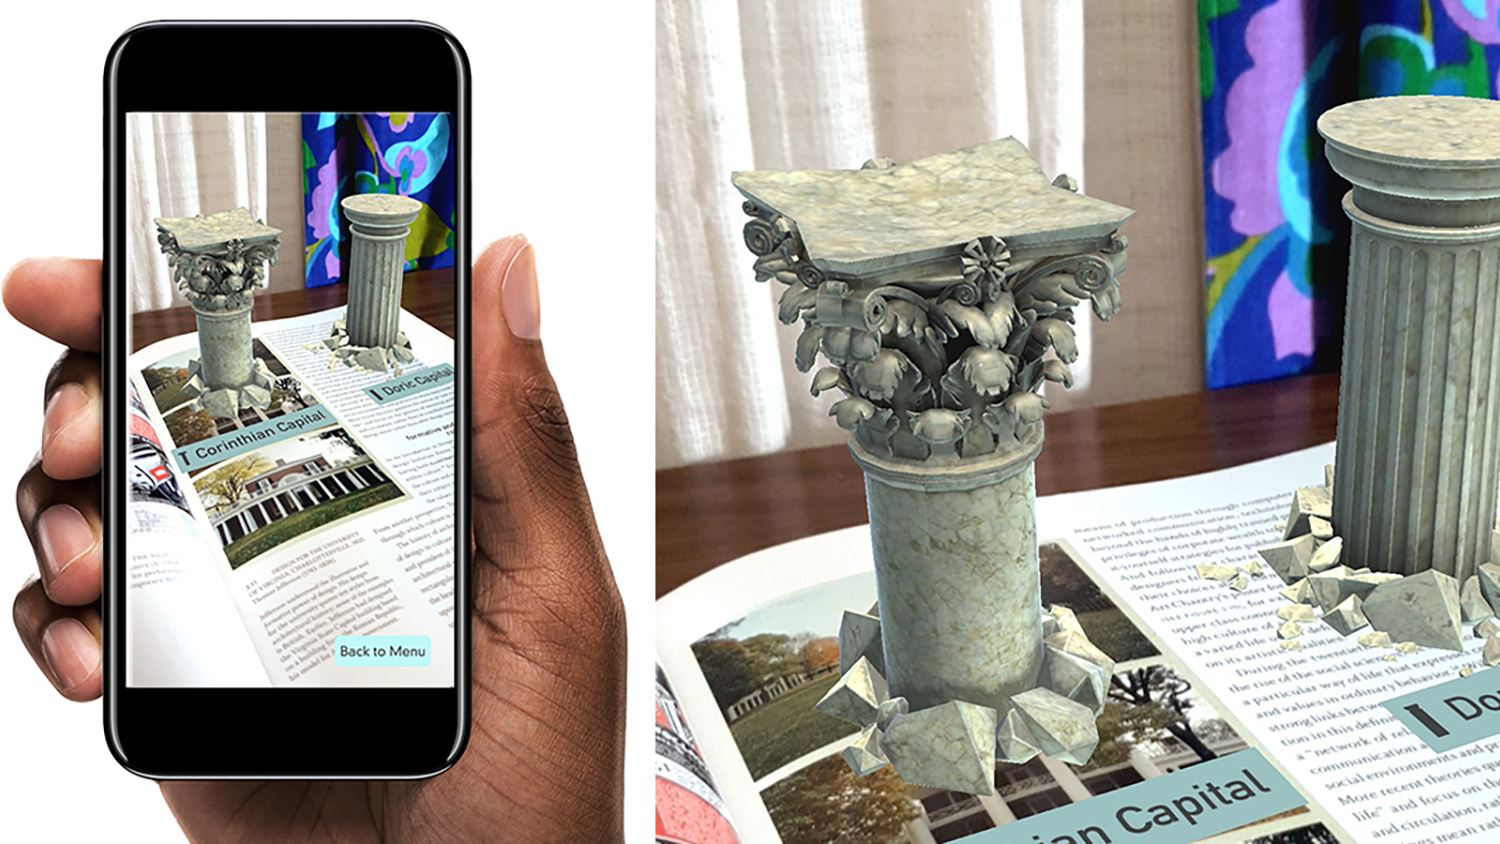 Screenshot of a phone with the Graphic Design Theory AR App on screen. A design pillar appears in augmented reality.